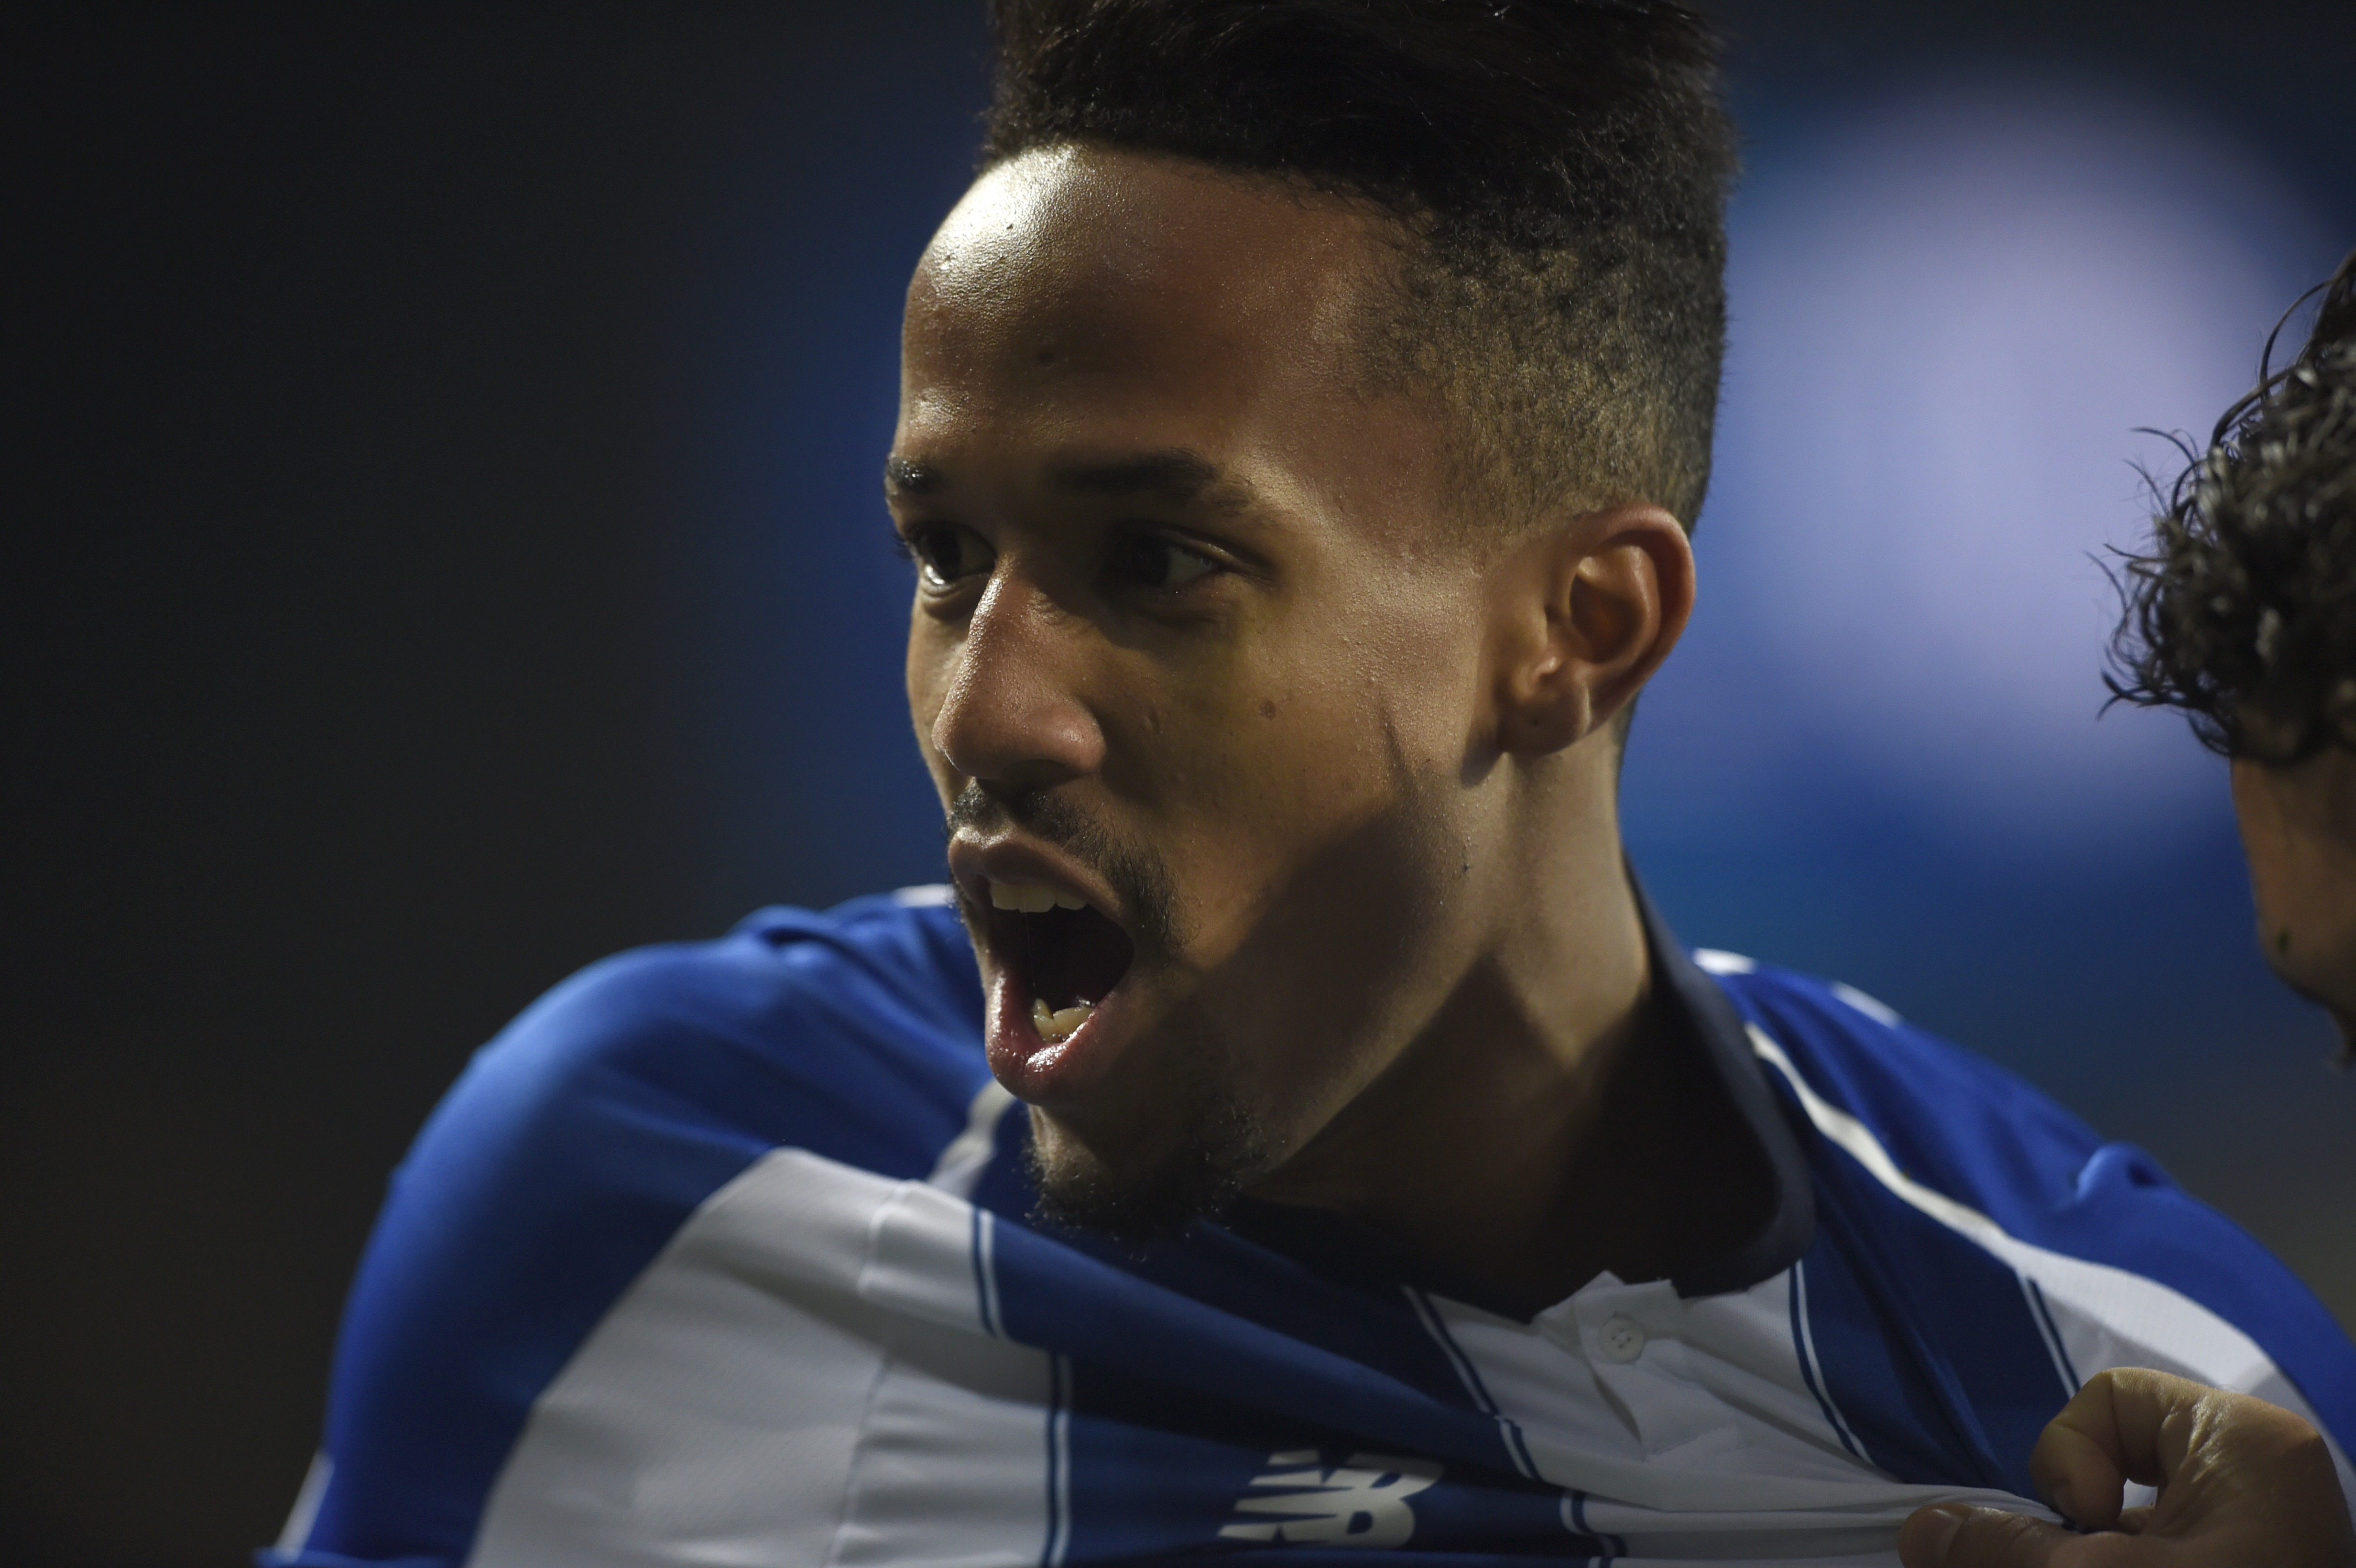 Porto's Brazilian defender Eder Militao celebrates after scoring a goal during the UEFA Champions League group D football match between Porto and Schalke 04 at the Dragao stadium in Porto on November 28, 2018. (Photo by MIGUEL RIOPA / AFP)        (Photo credit should read MIGUEL RIOPA/AFP/Getty Images)